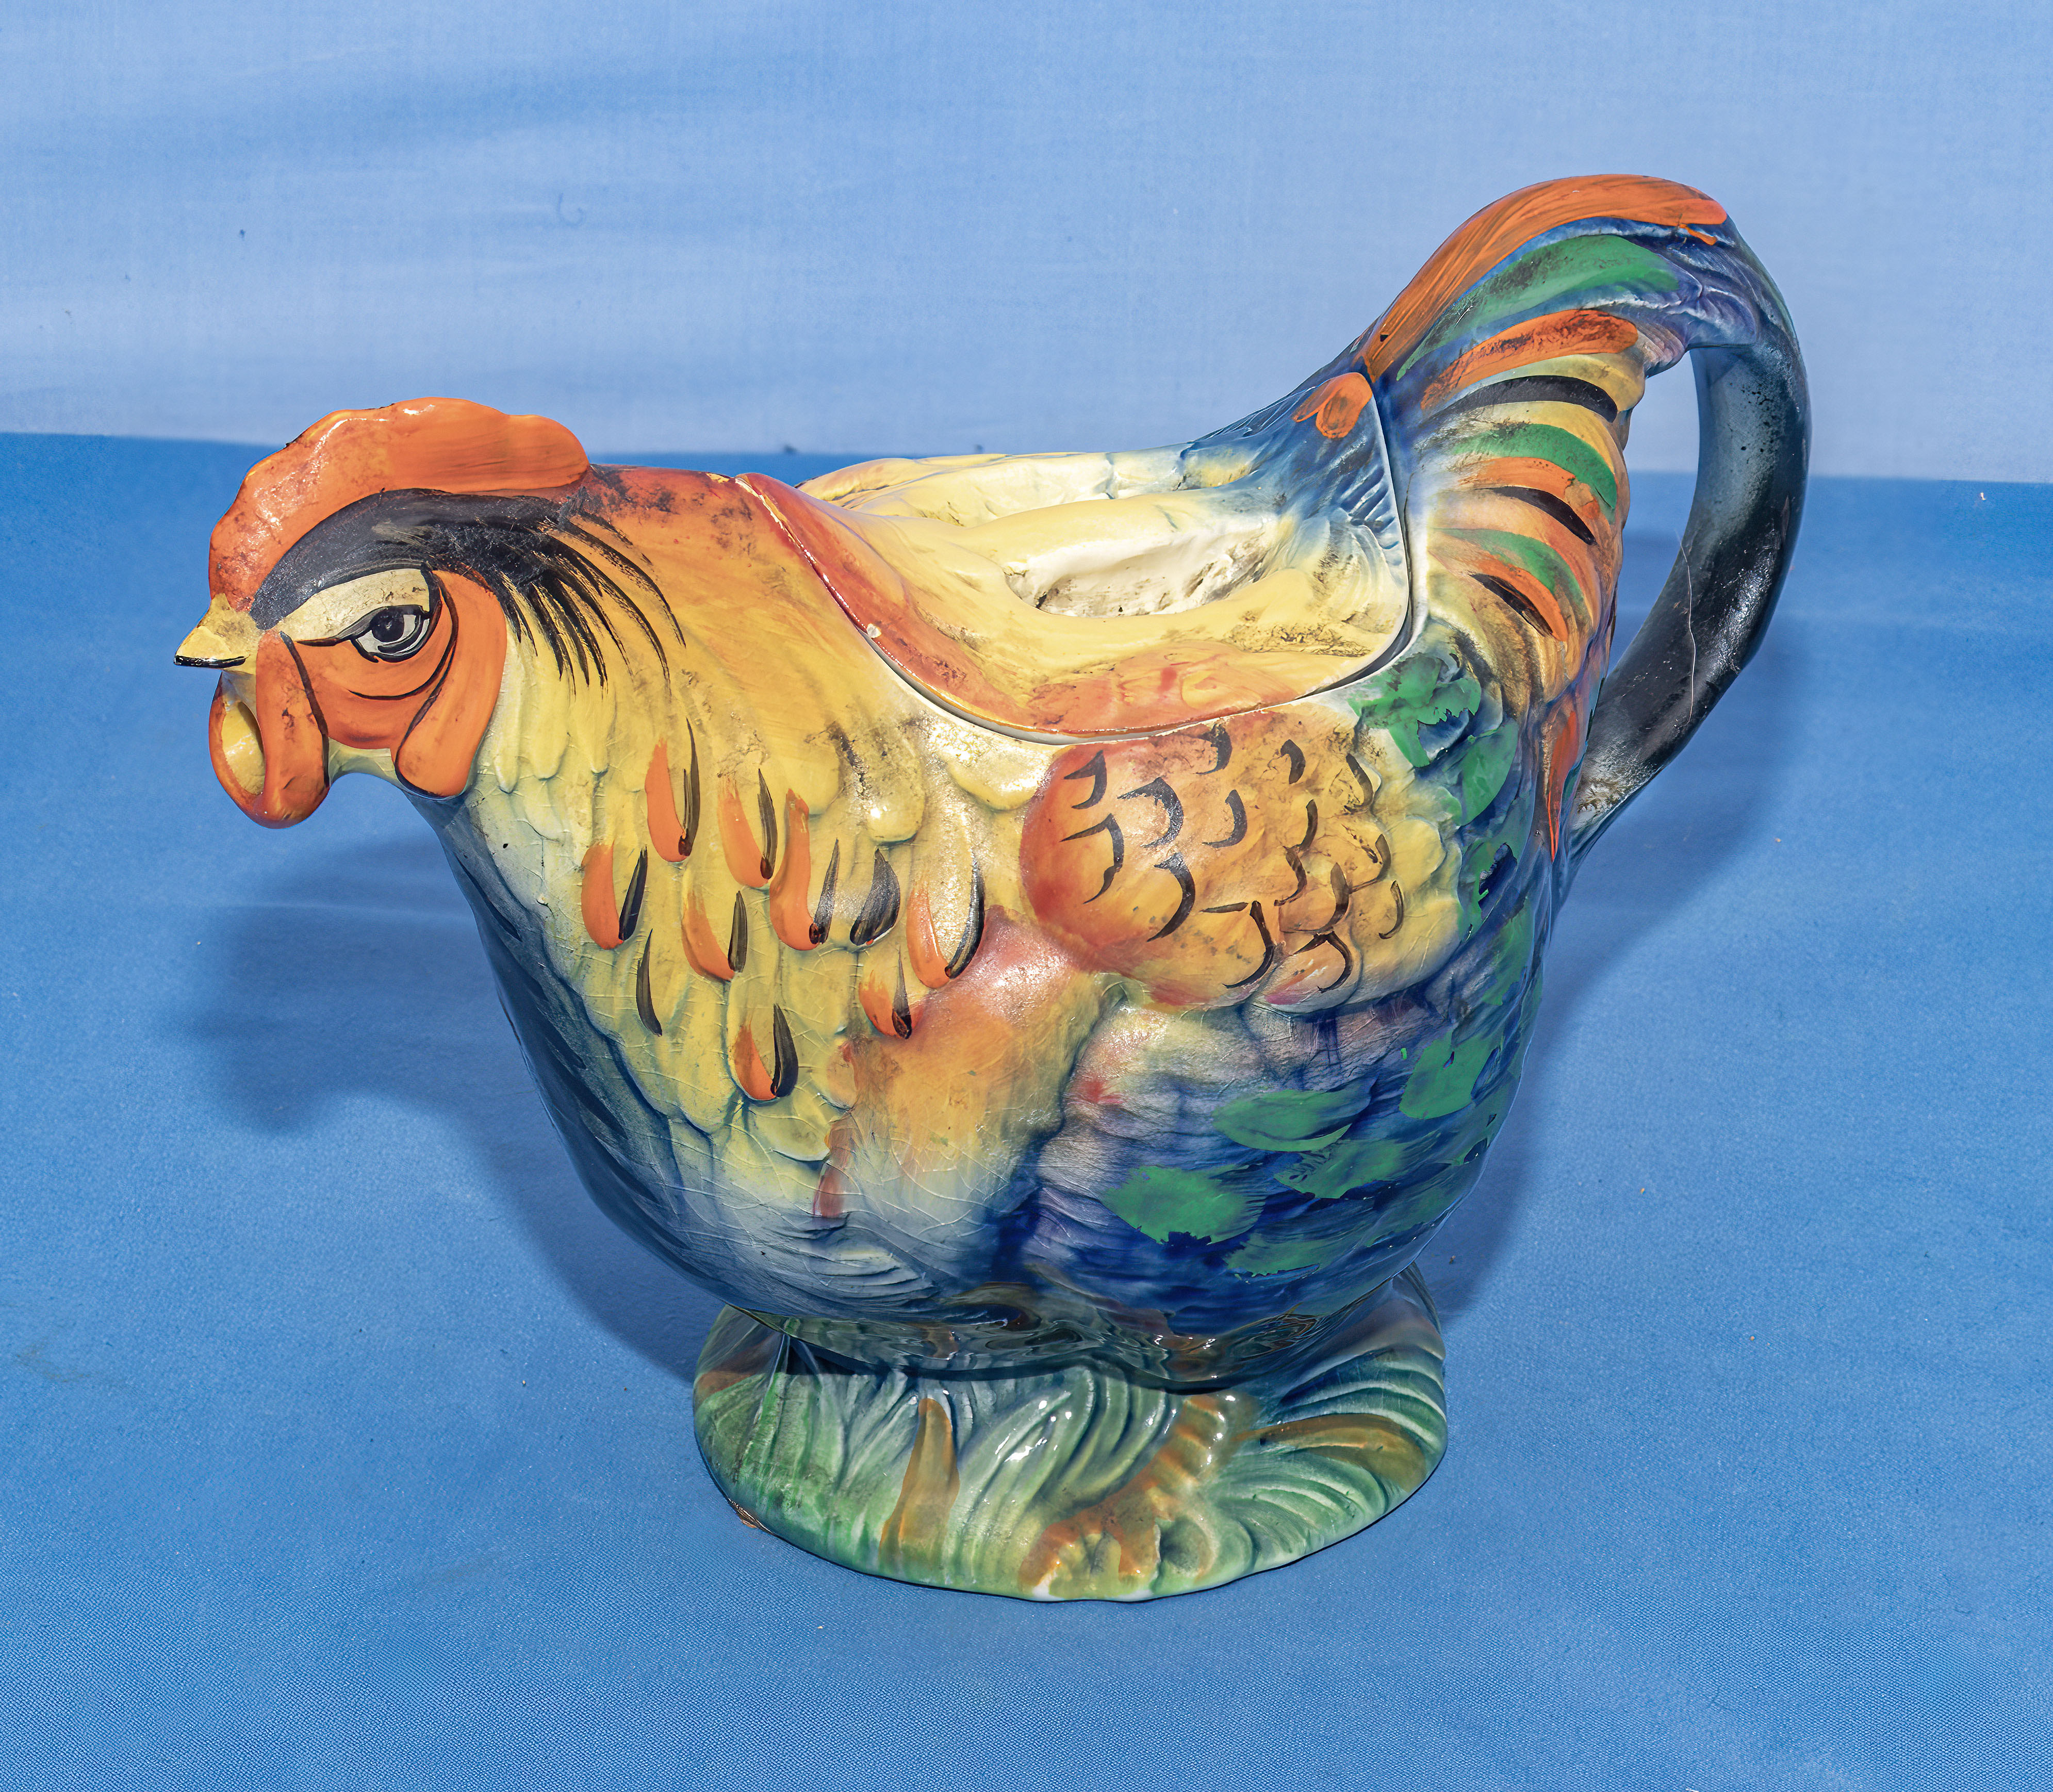 1930's majolica Rooster teapot